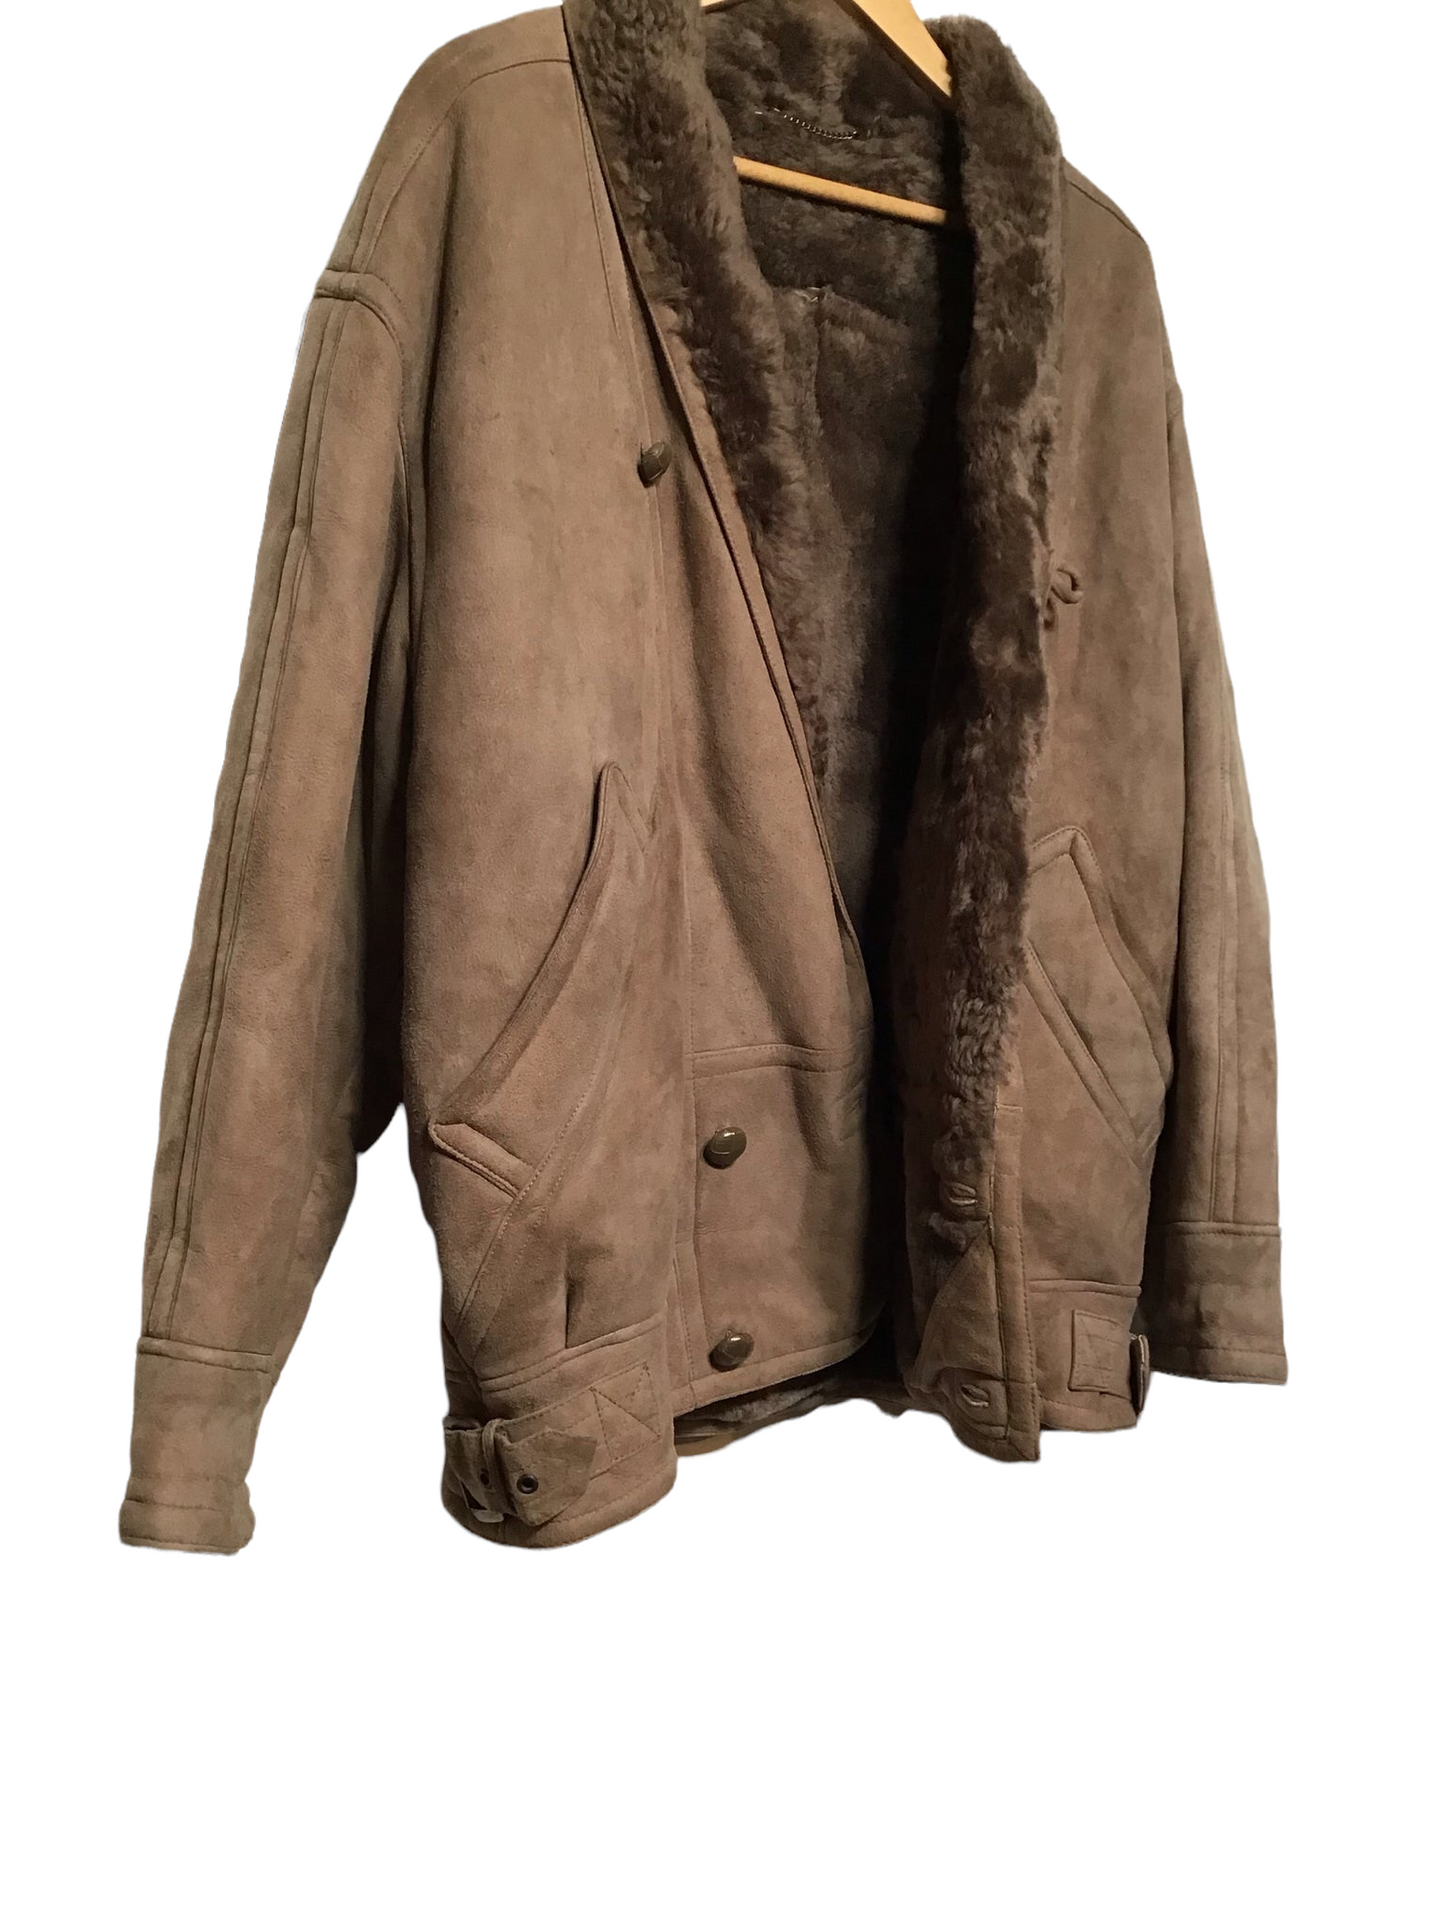 Suede And Shearling Jacket (Size M)